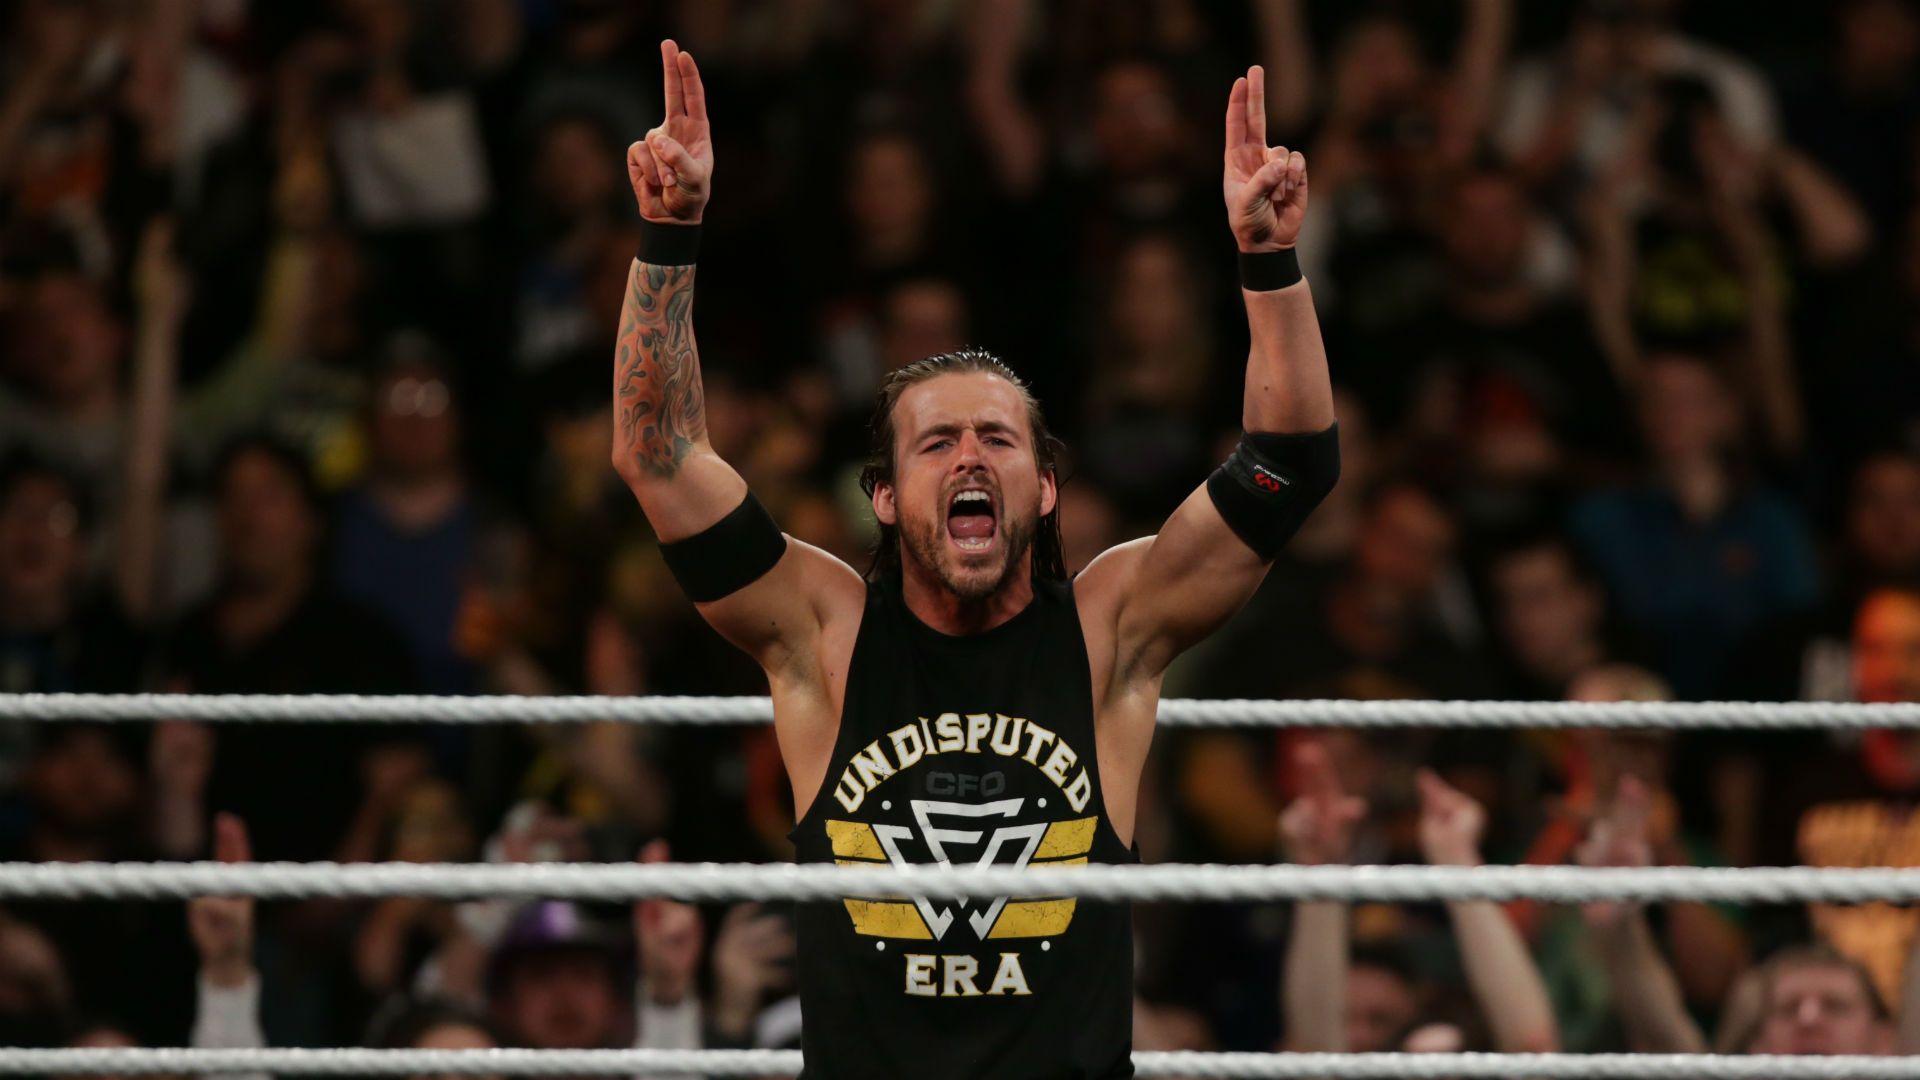 WWE star Adam Cole on his NXT debut, teaming with friends